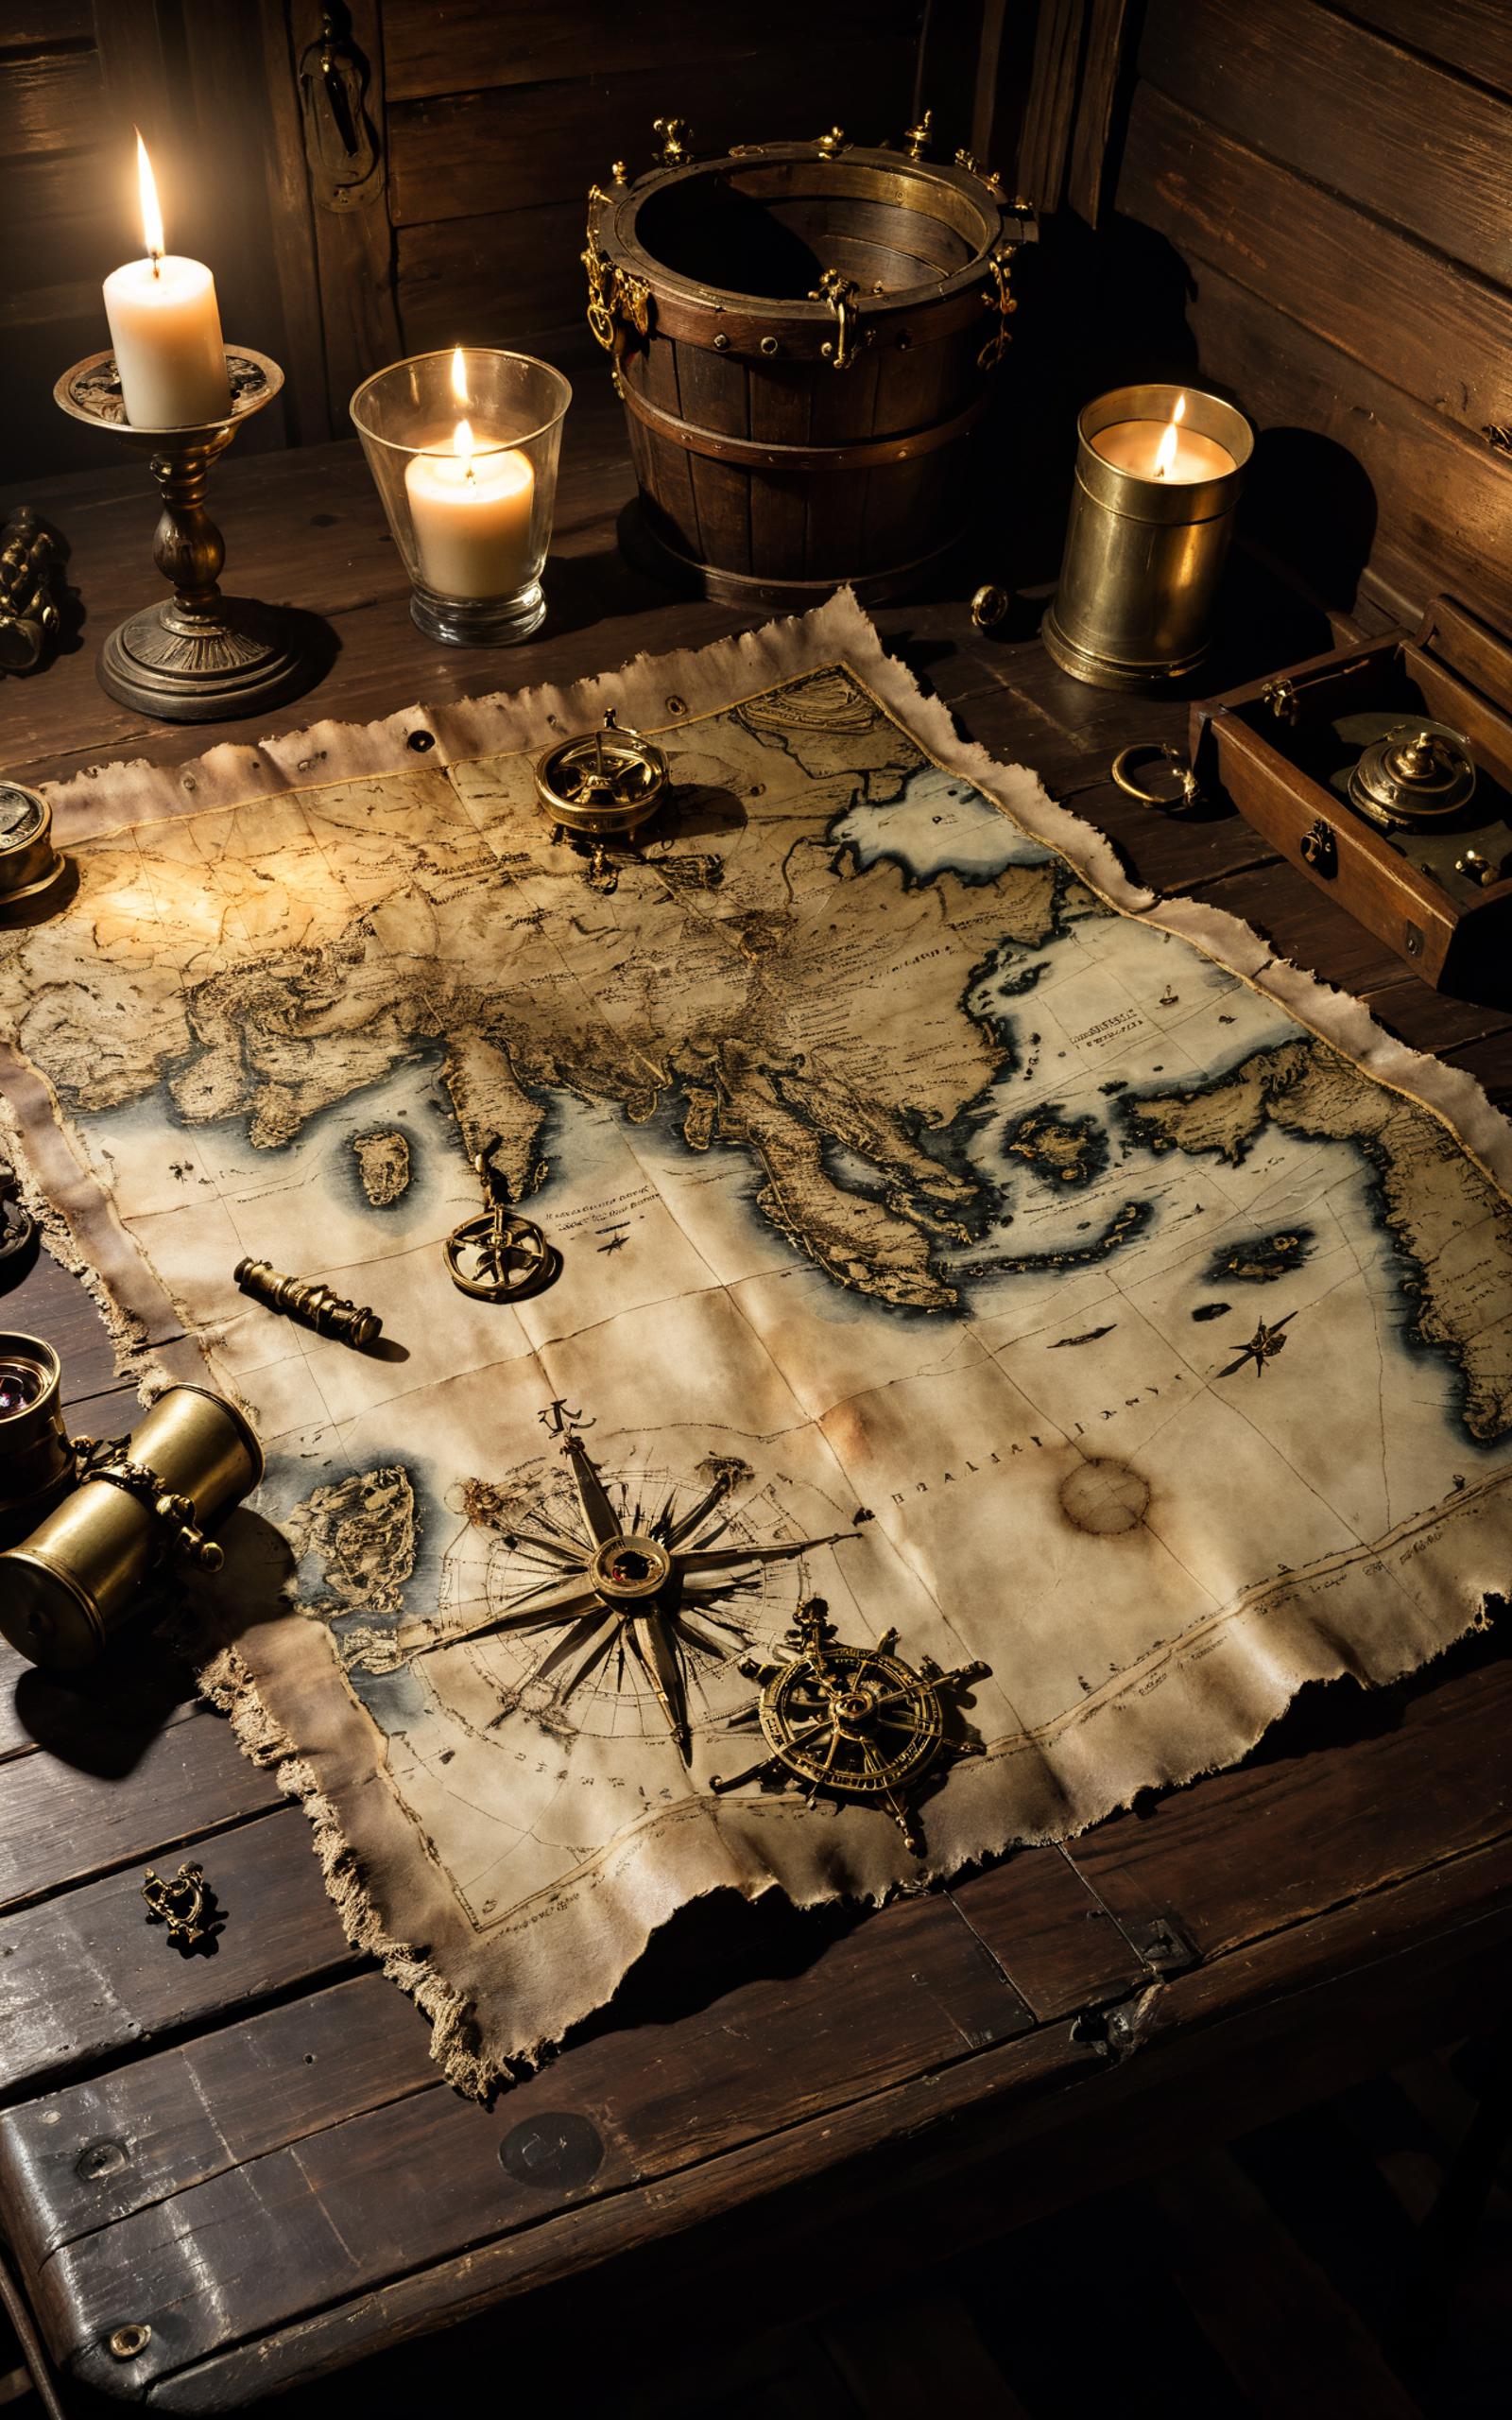 An old map with a compass on a wooden table, surrounded by various items.